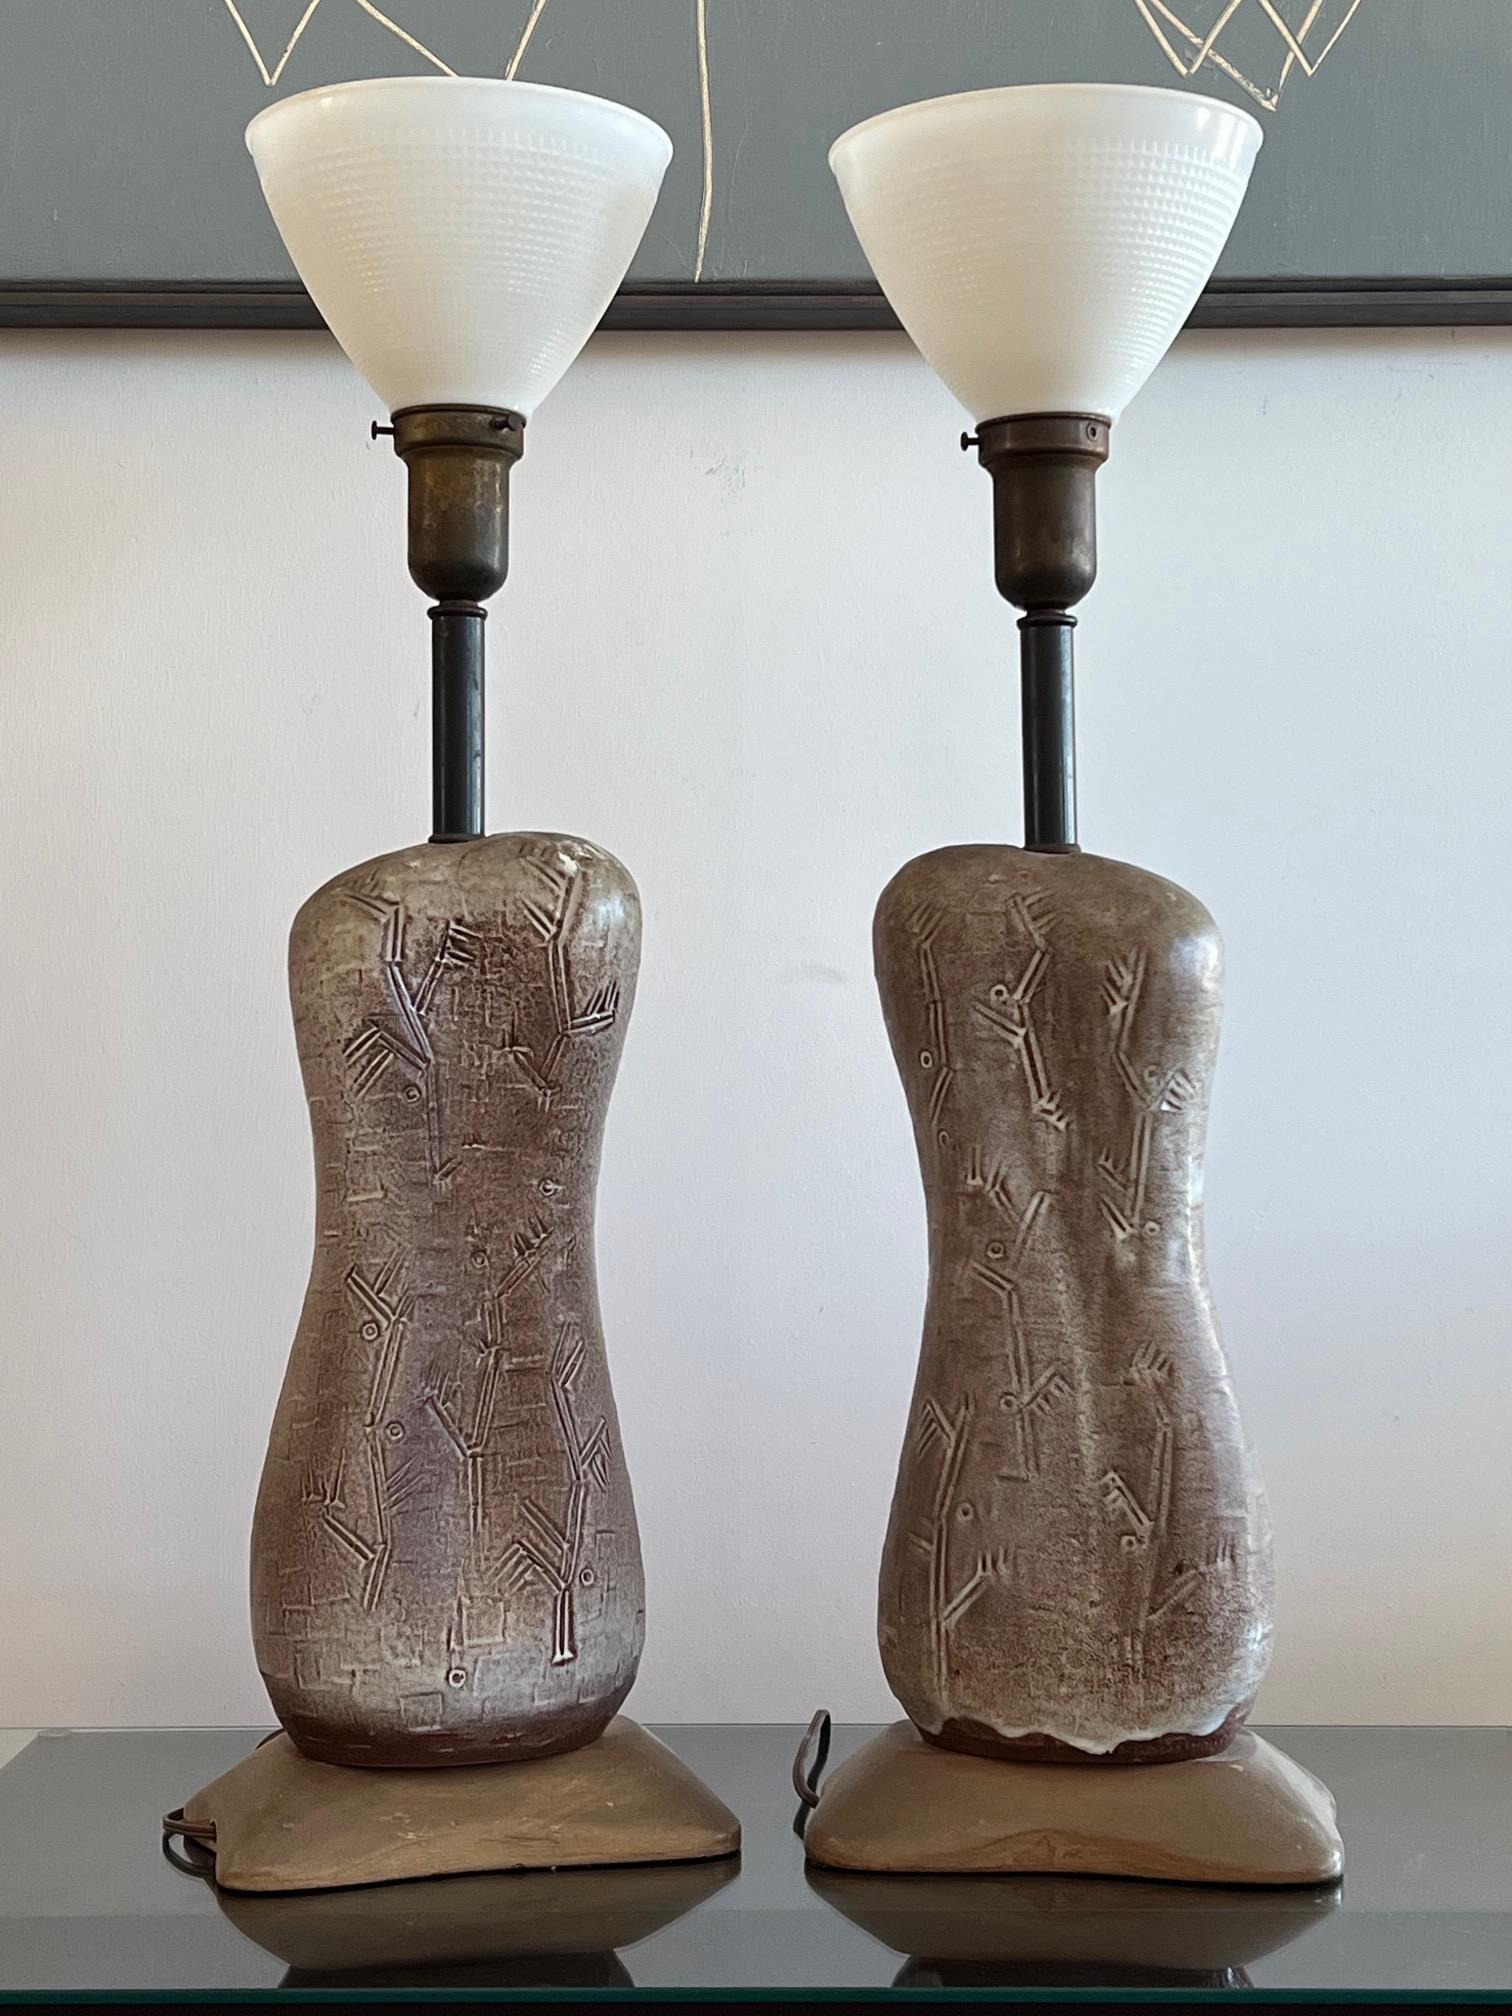 A pair of unusual ceramic lamps by Design Technics. Interesting biomorphic shapes with stylized decoration. Original shades, note matching biomorphic shades.